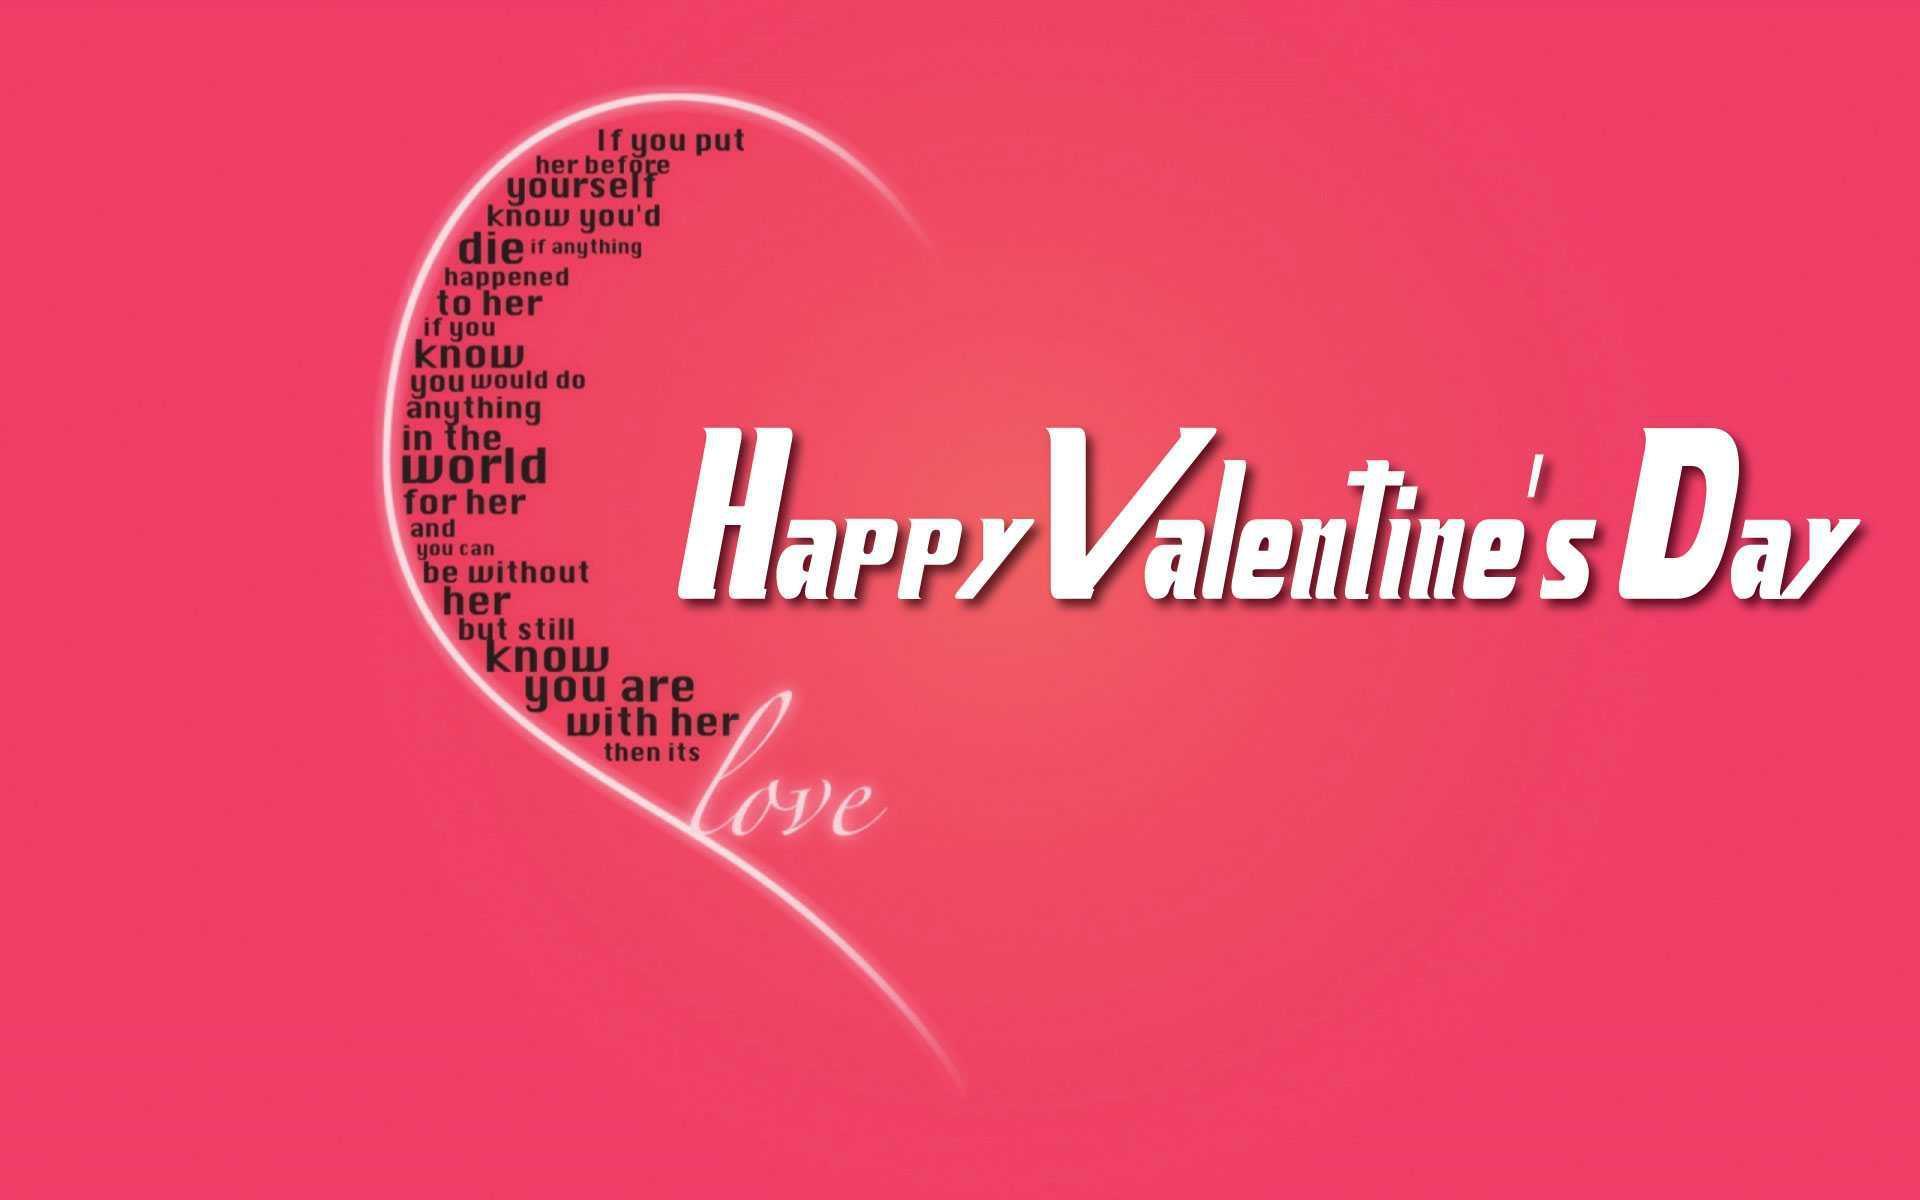 Happy Valentine's Day 2019 SMS, Image Ideas for Collage All Friends